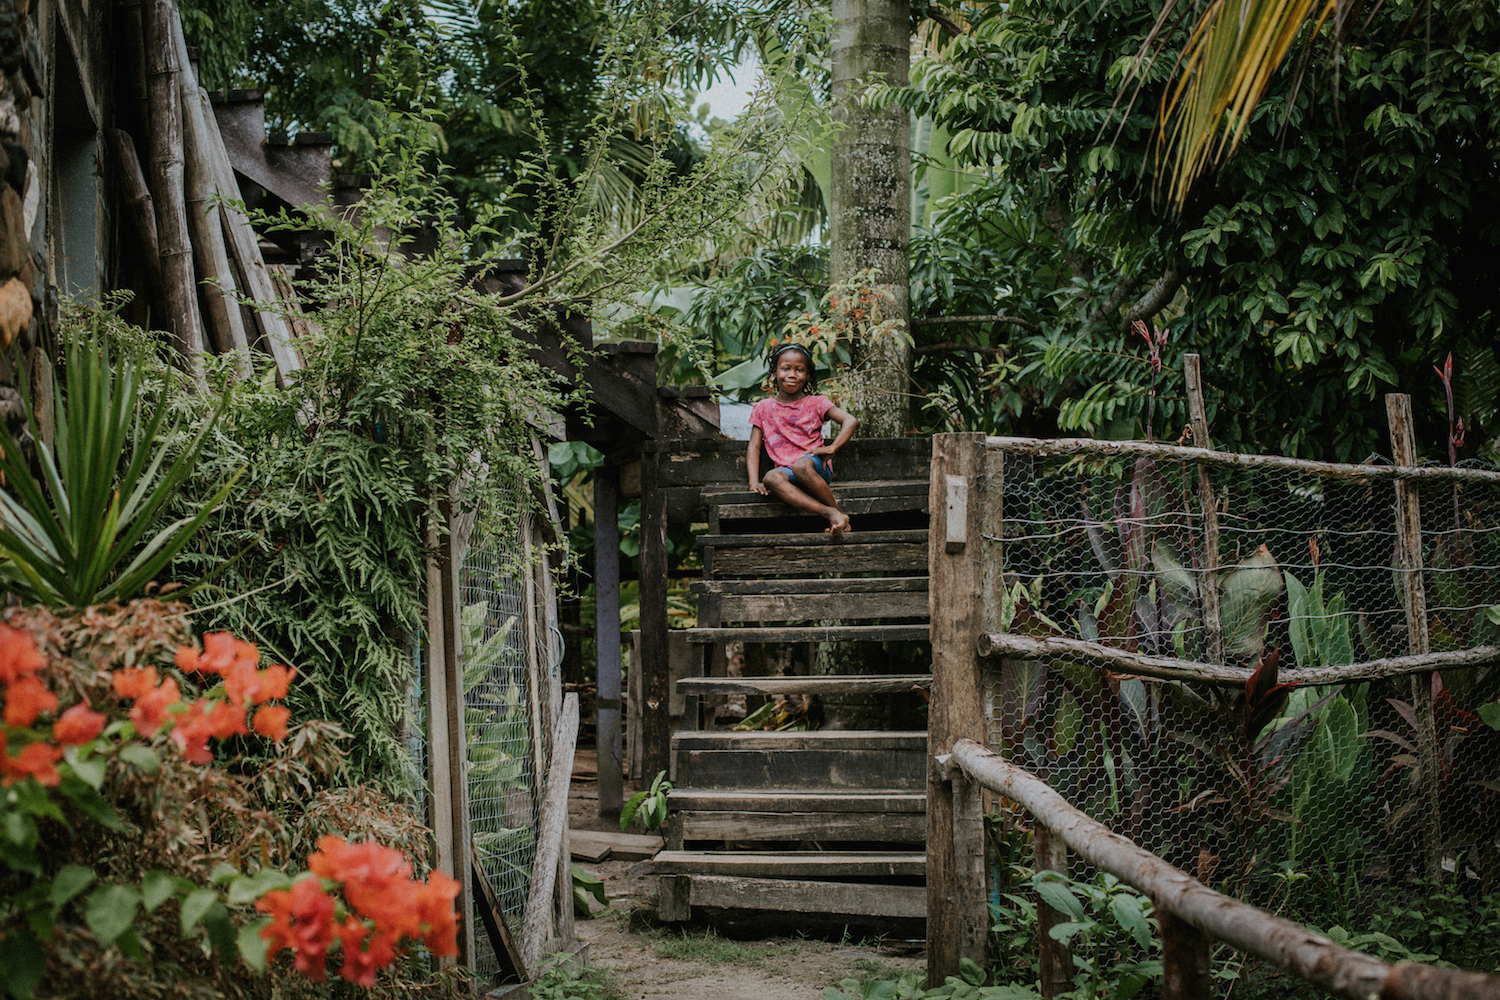  Josephine poses for a photo on her grandmother's front porch steps in Gales Point, Belize. 